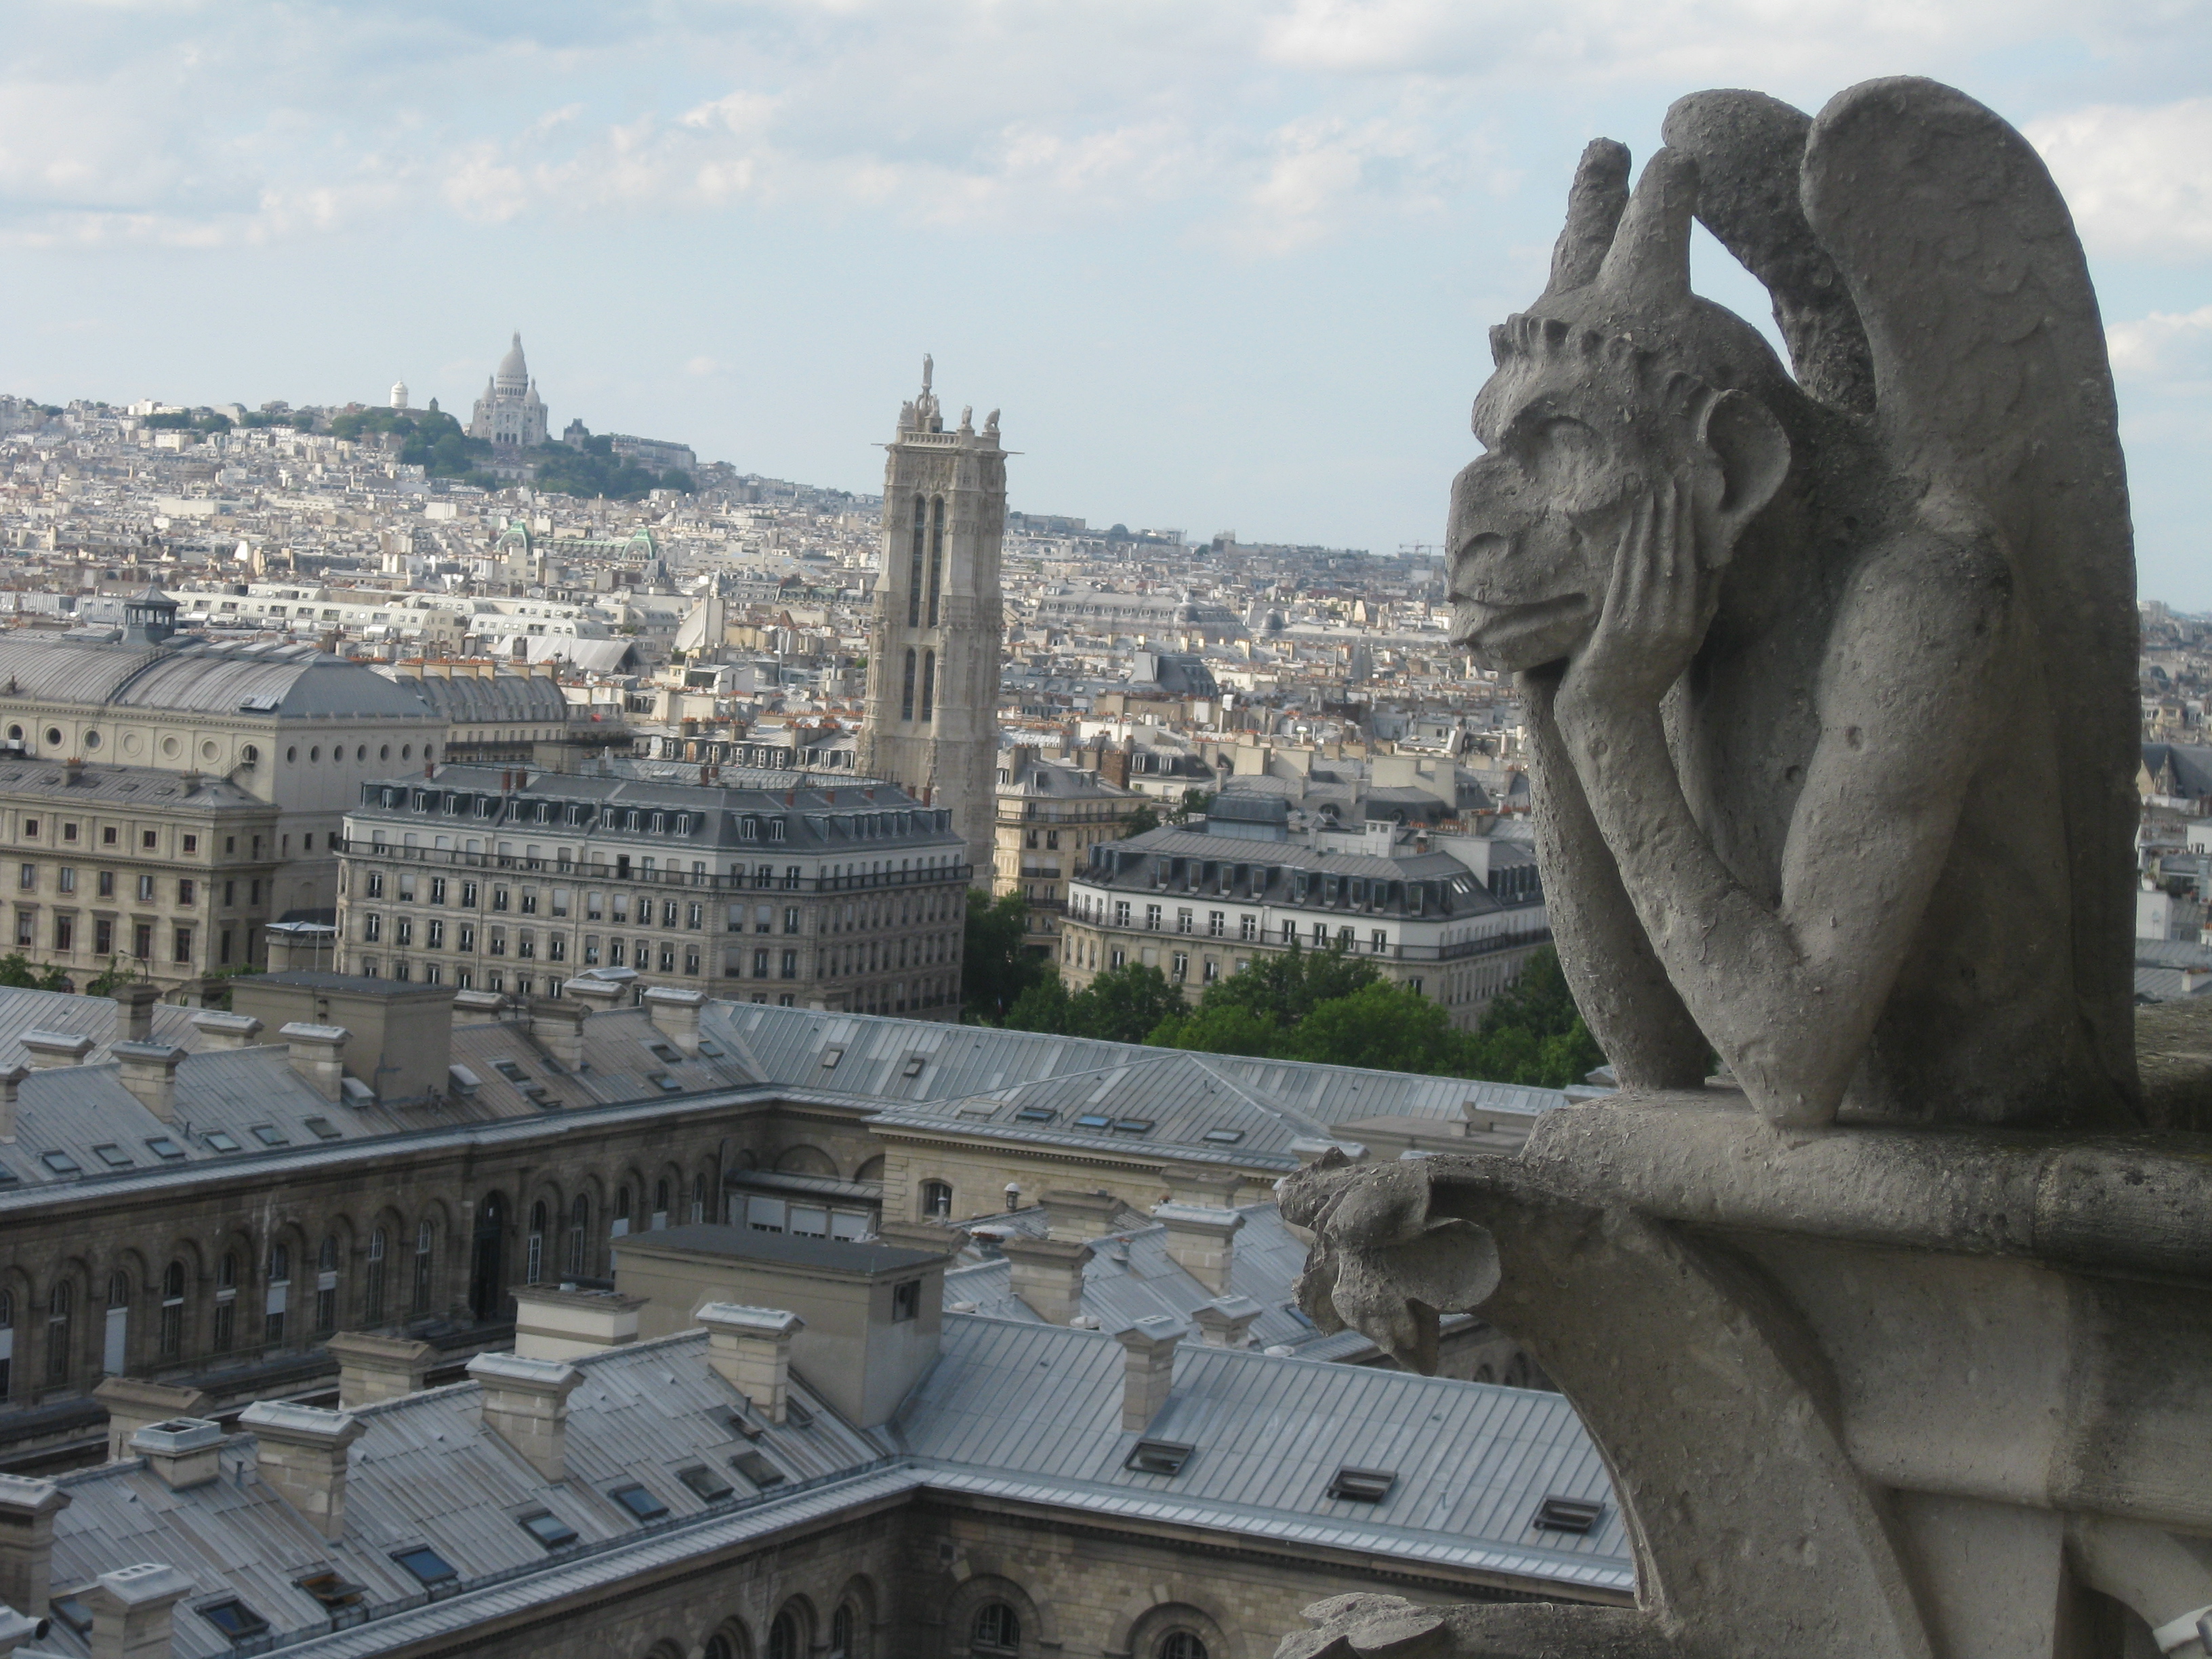 looking out at Paris from Notre Dame